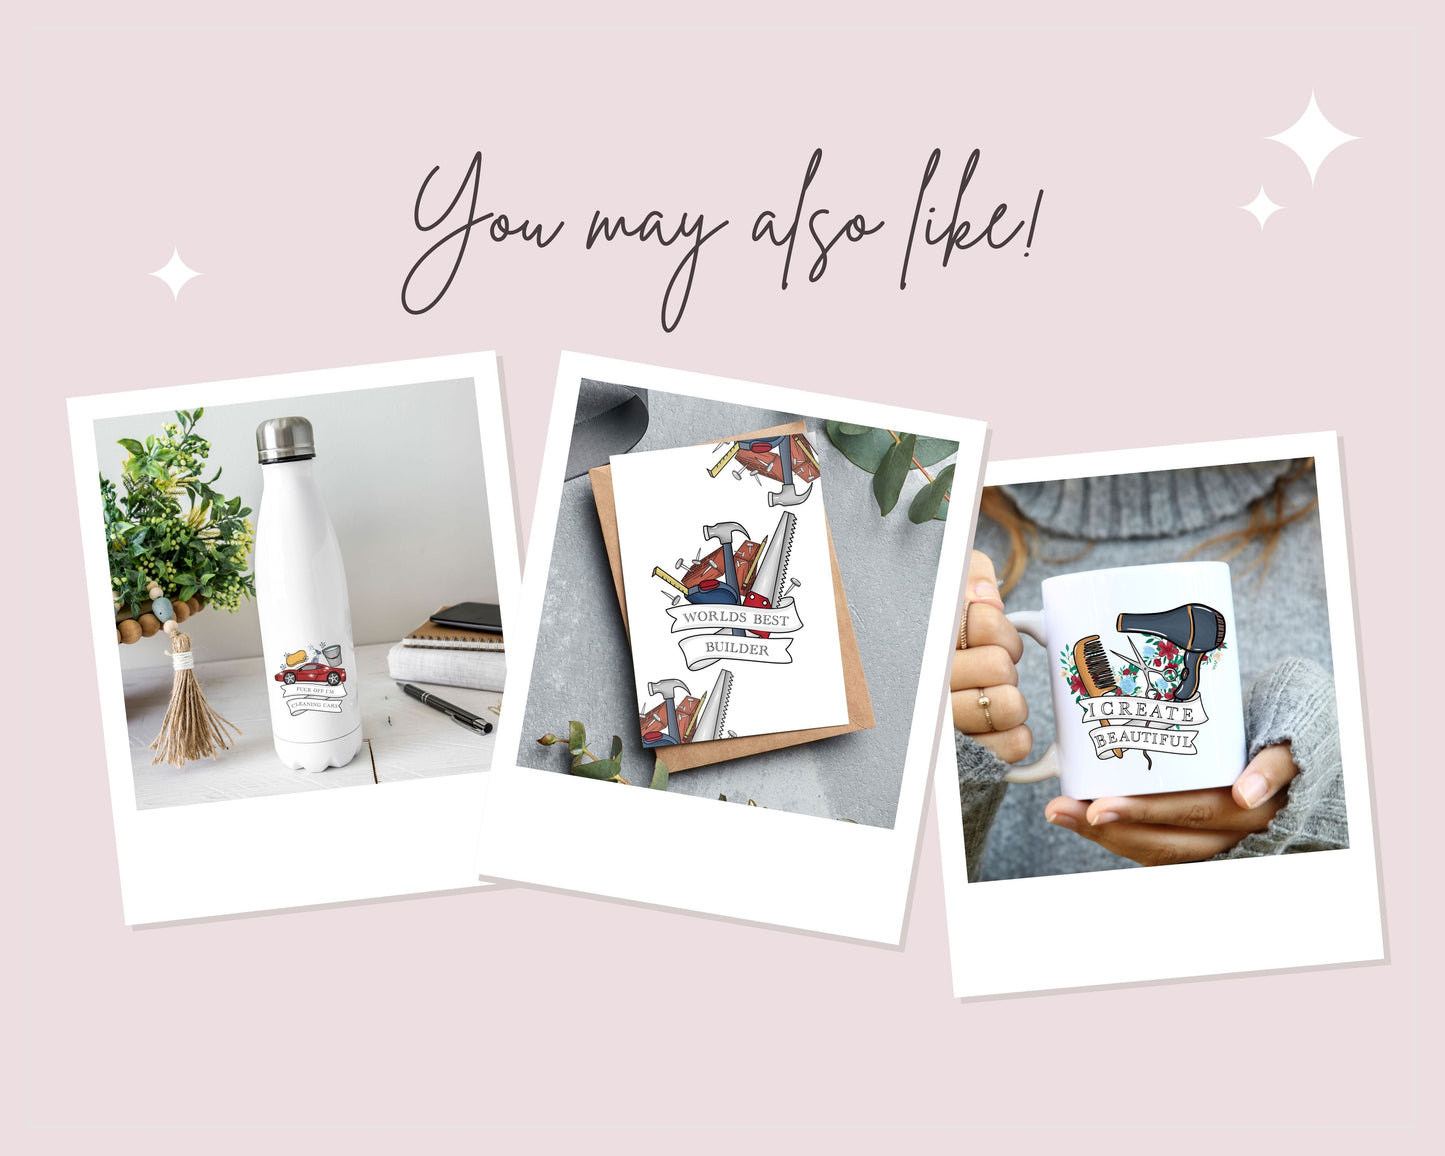 Flamingo Gift Ideas | Flamingo Gifts For Her